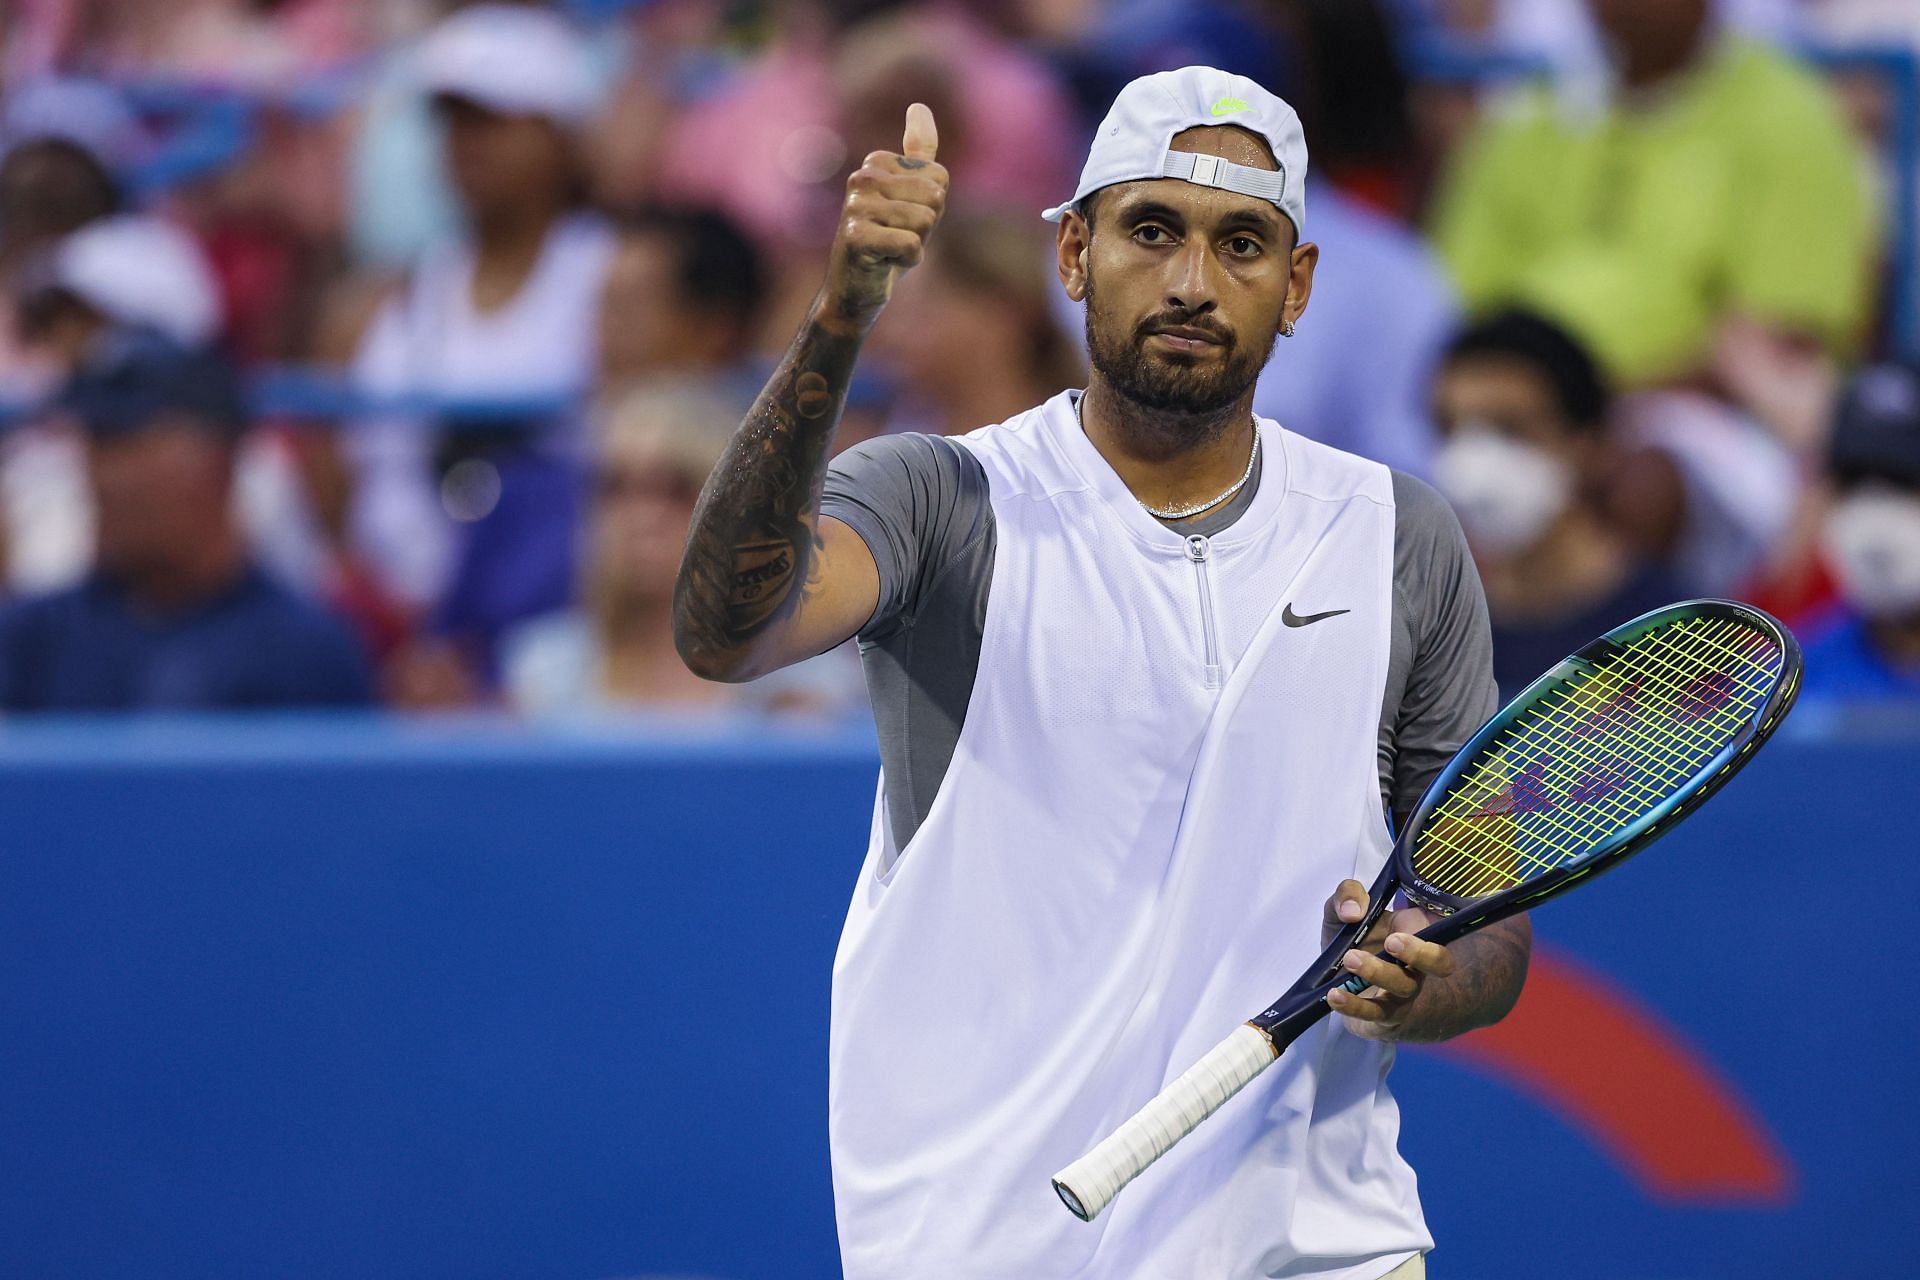 Nick Kyrgios to play 3 exhibition events